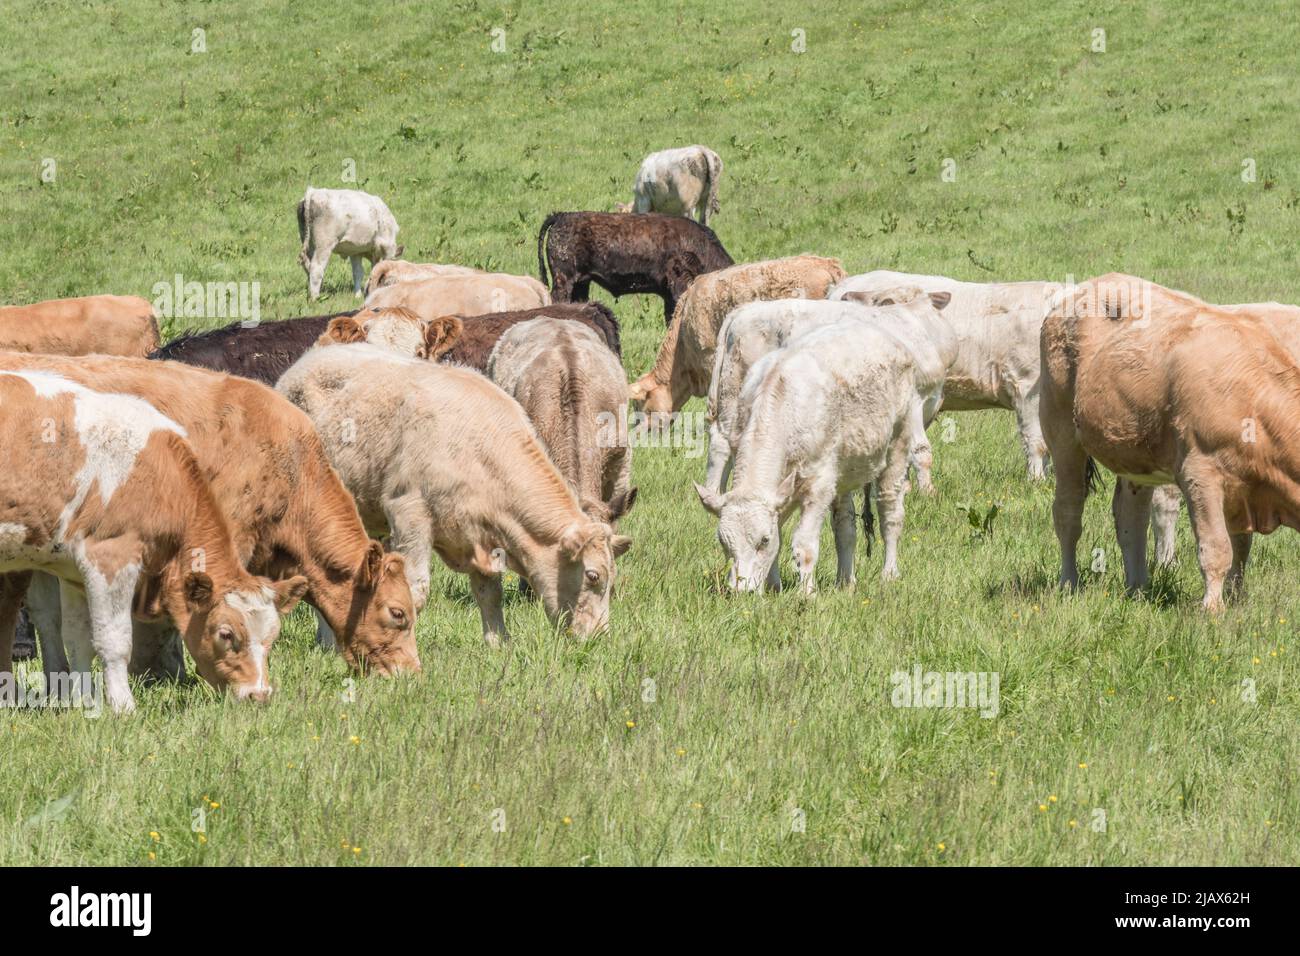 Small group of young bullocks in field & looking inquisitively at camera. For UK livestock industry, British beef, UK farming, UK farm animal welfare. Stock Photo